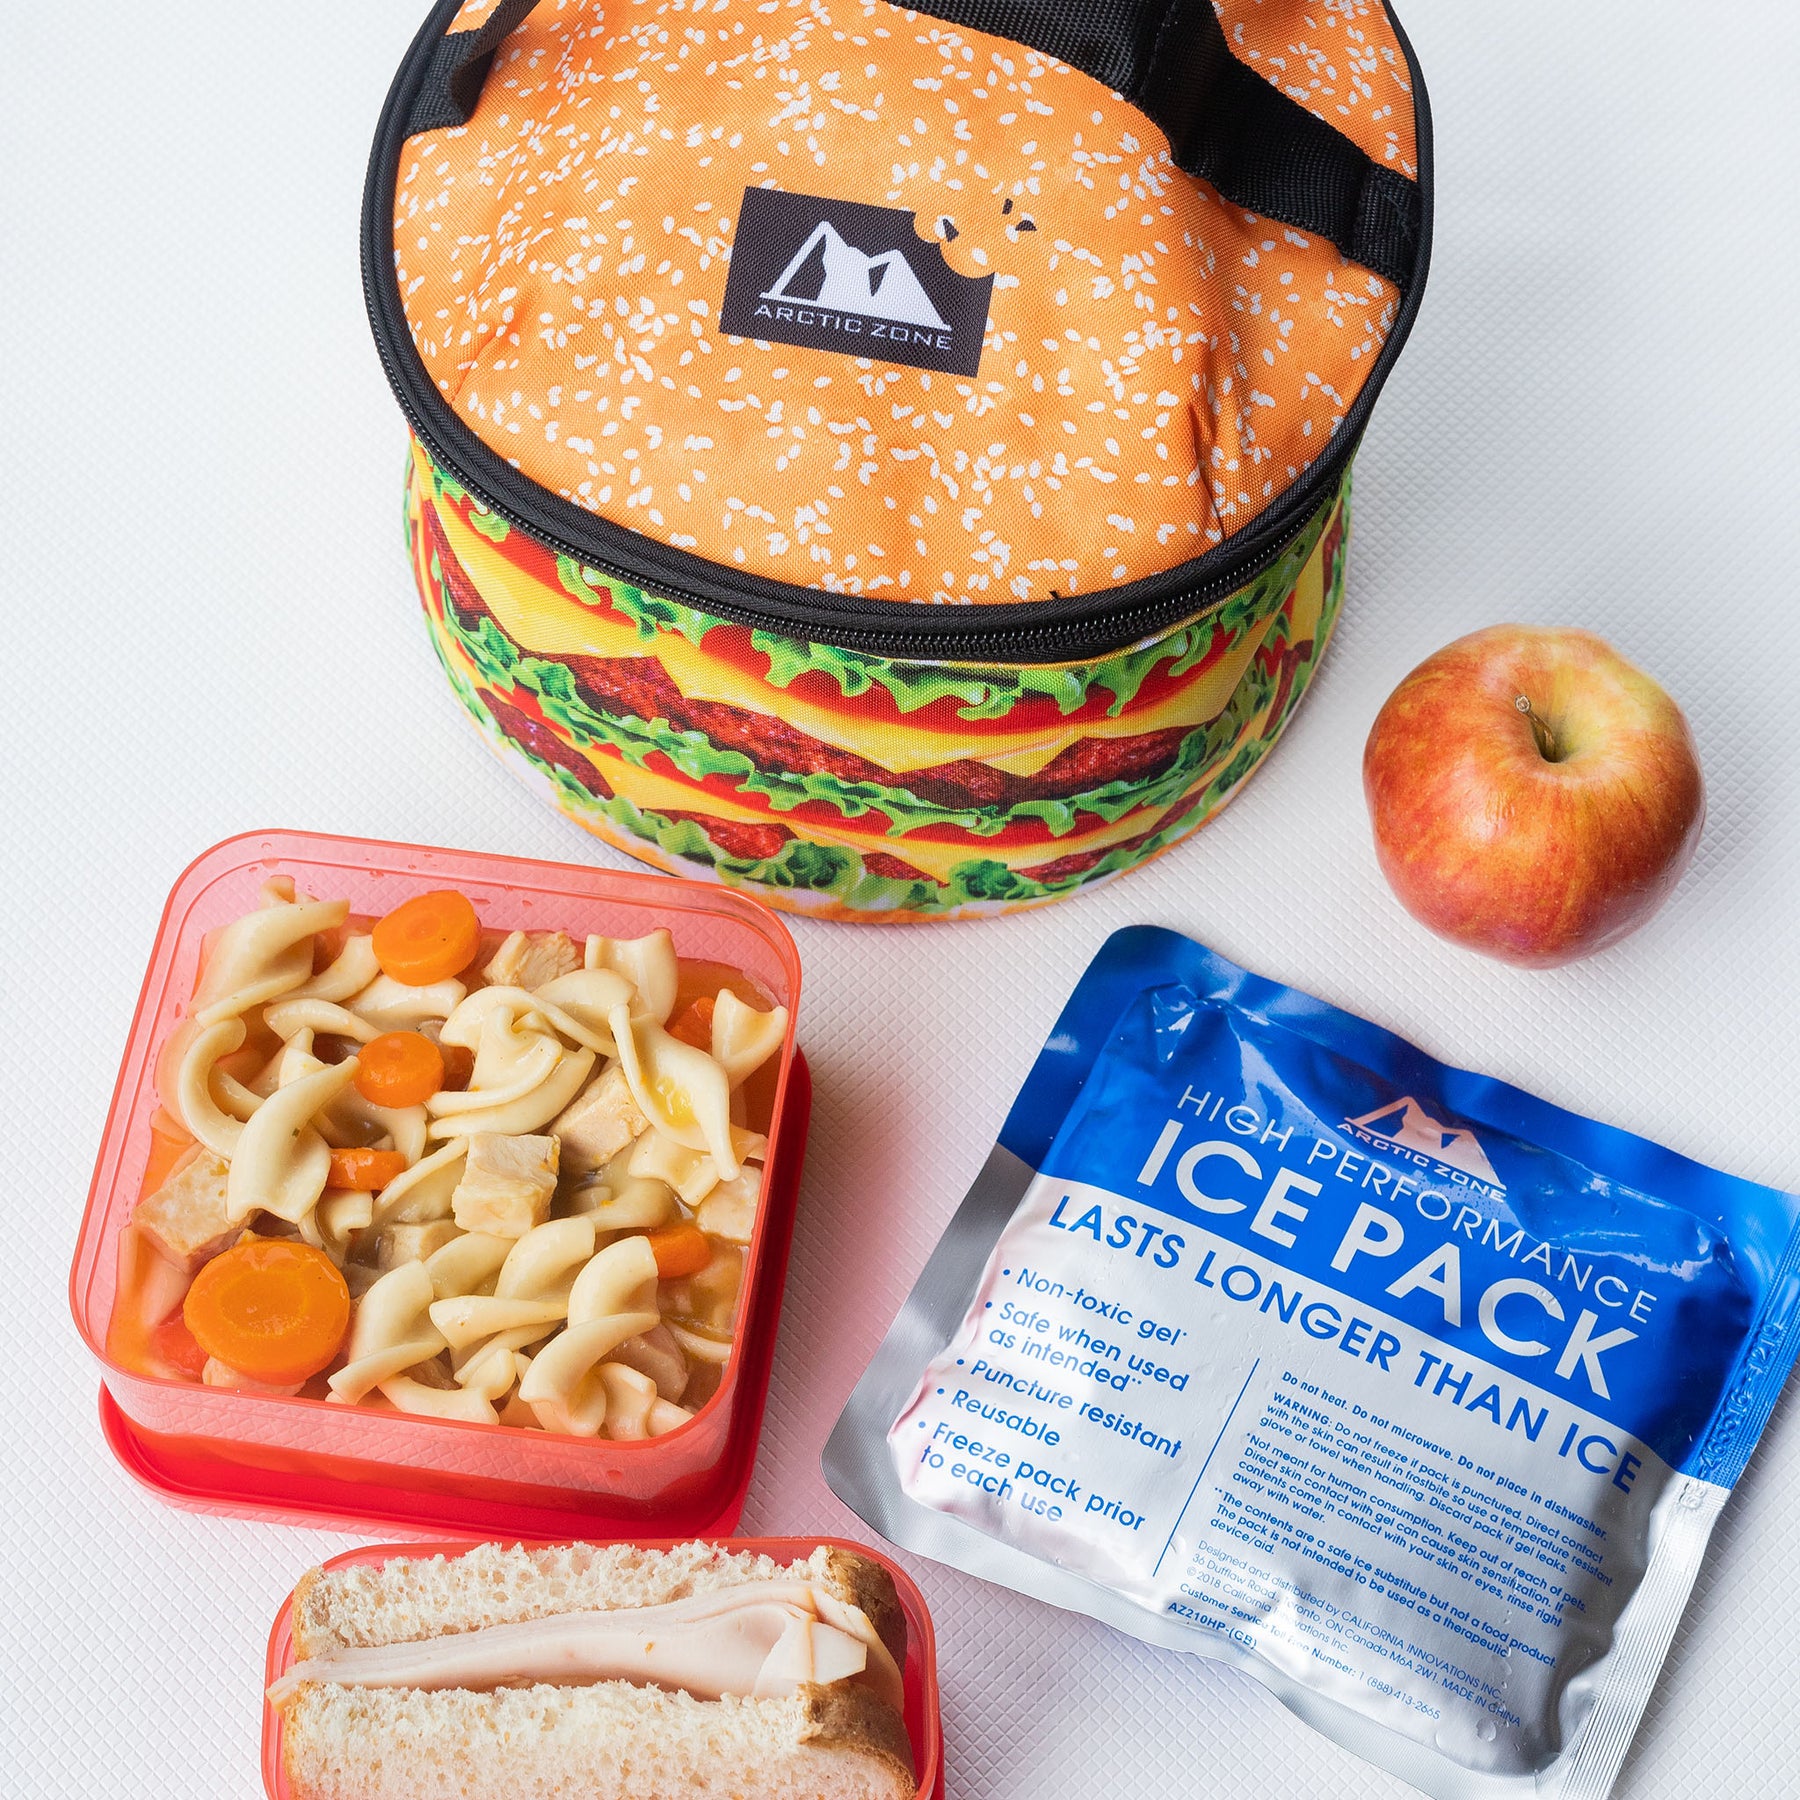 Arctic Zone Reusable Lunch Box Combo Kit with Accessories, Green